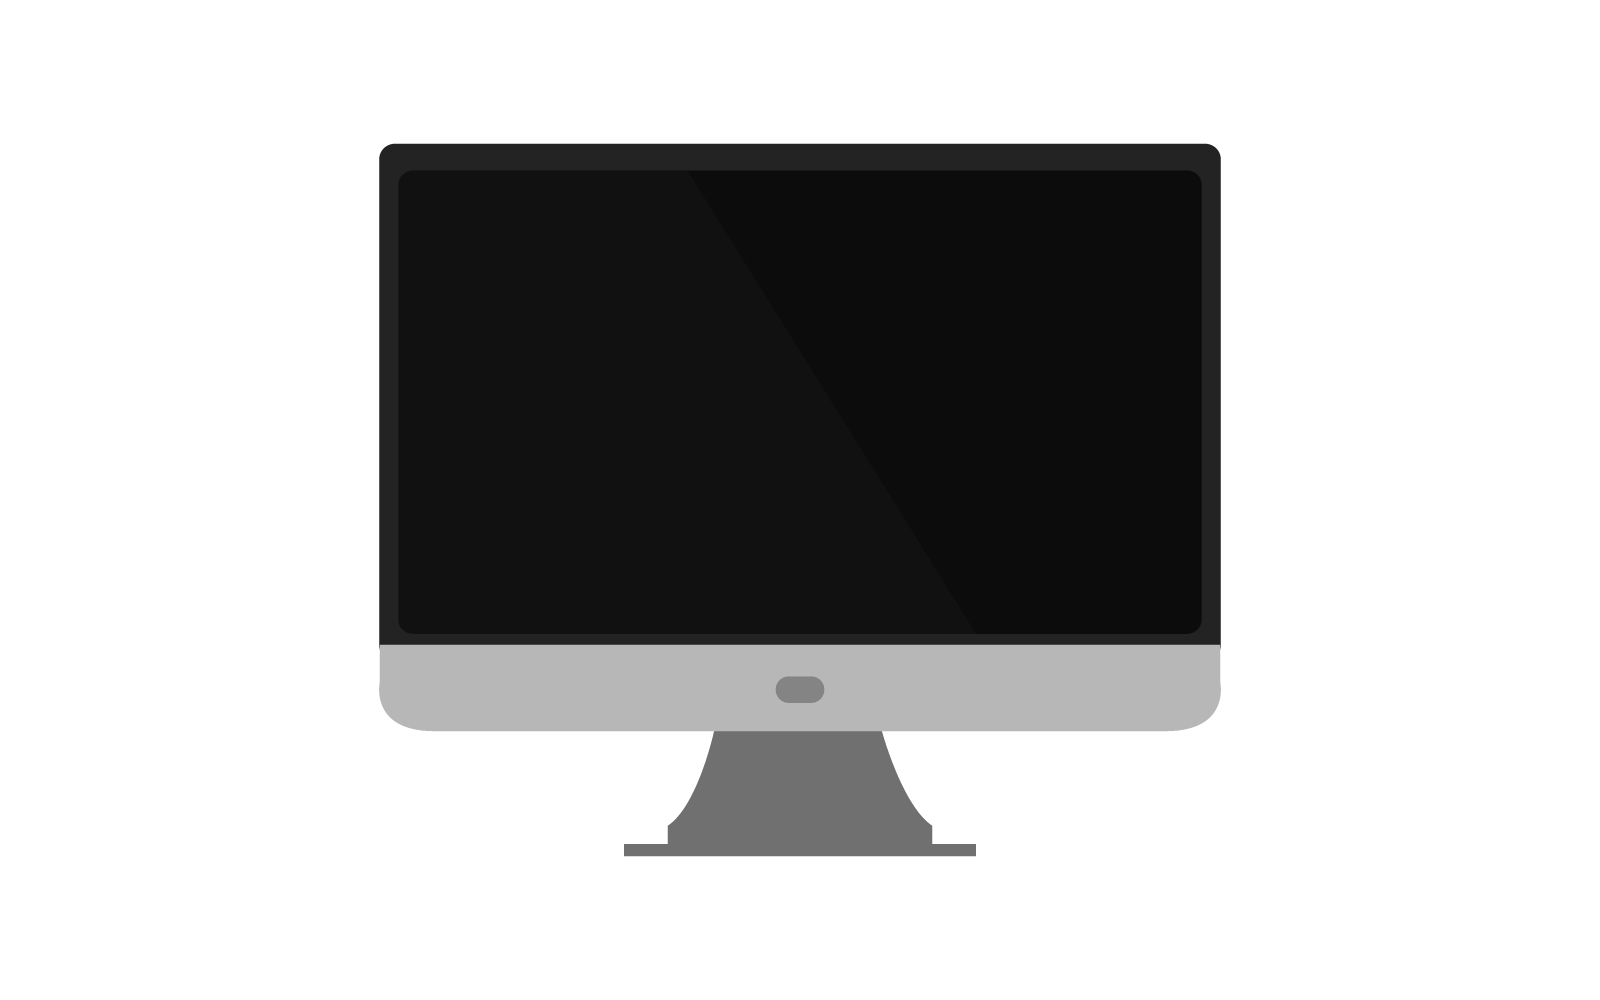 Vectorized computer on background and illustrated